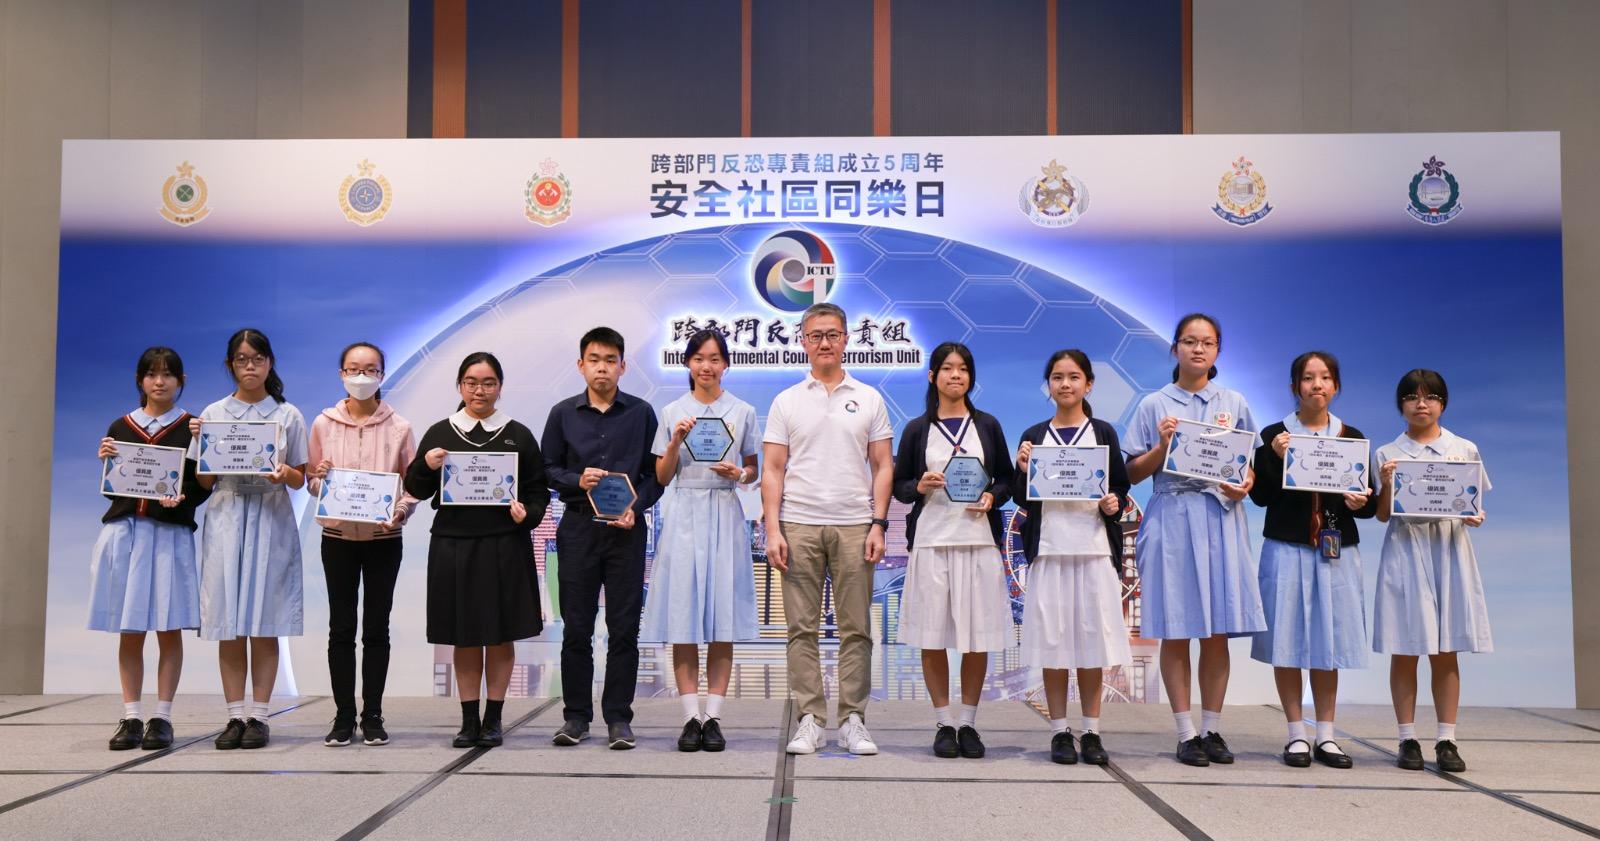 The “Safe Community Fun Day” organised by the Inter-departmental Counter Terrorism Unit was held today (April 29) at the Hong Kong Science Park. Photo shows the Commissioner of Police, Mr Siu Chak-yee, presenting an award to a winner of the “5th Anniversary Colouring / Graphic Design Competition”.